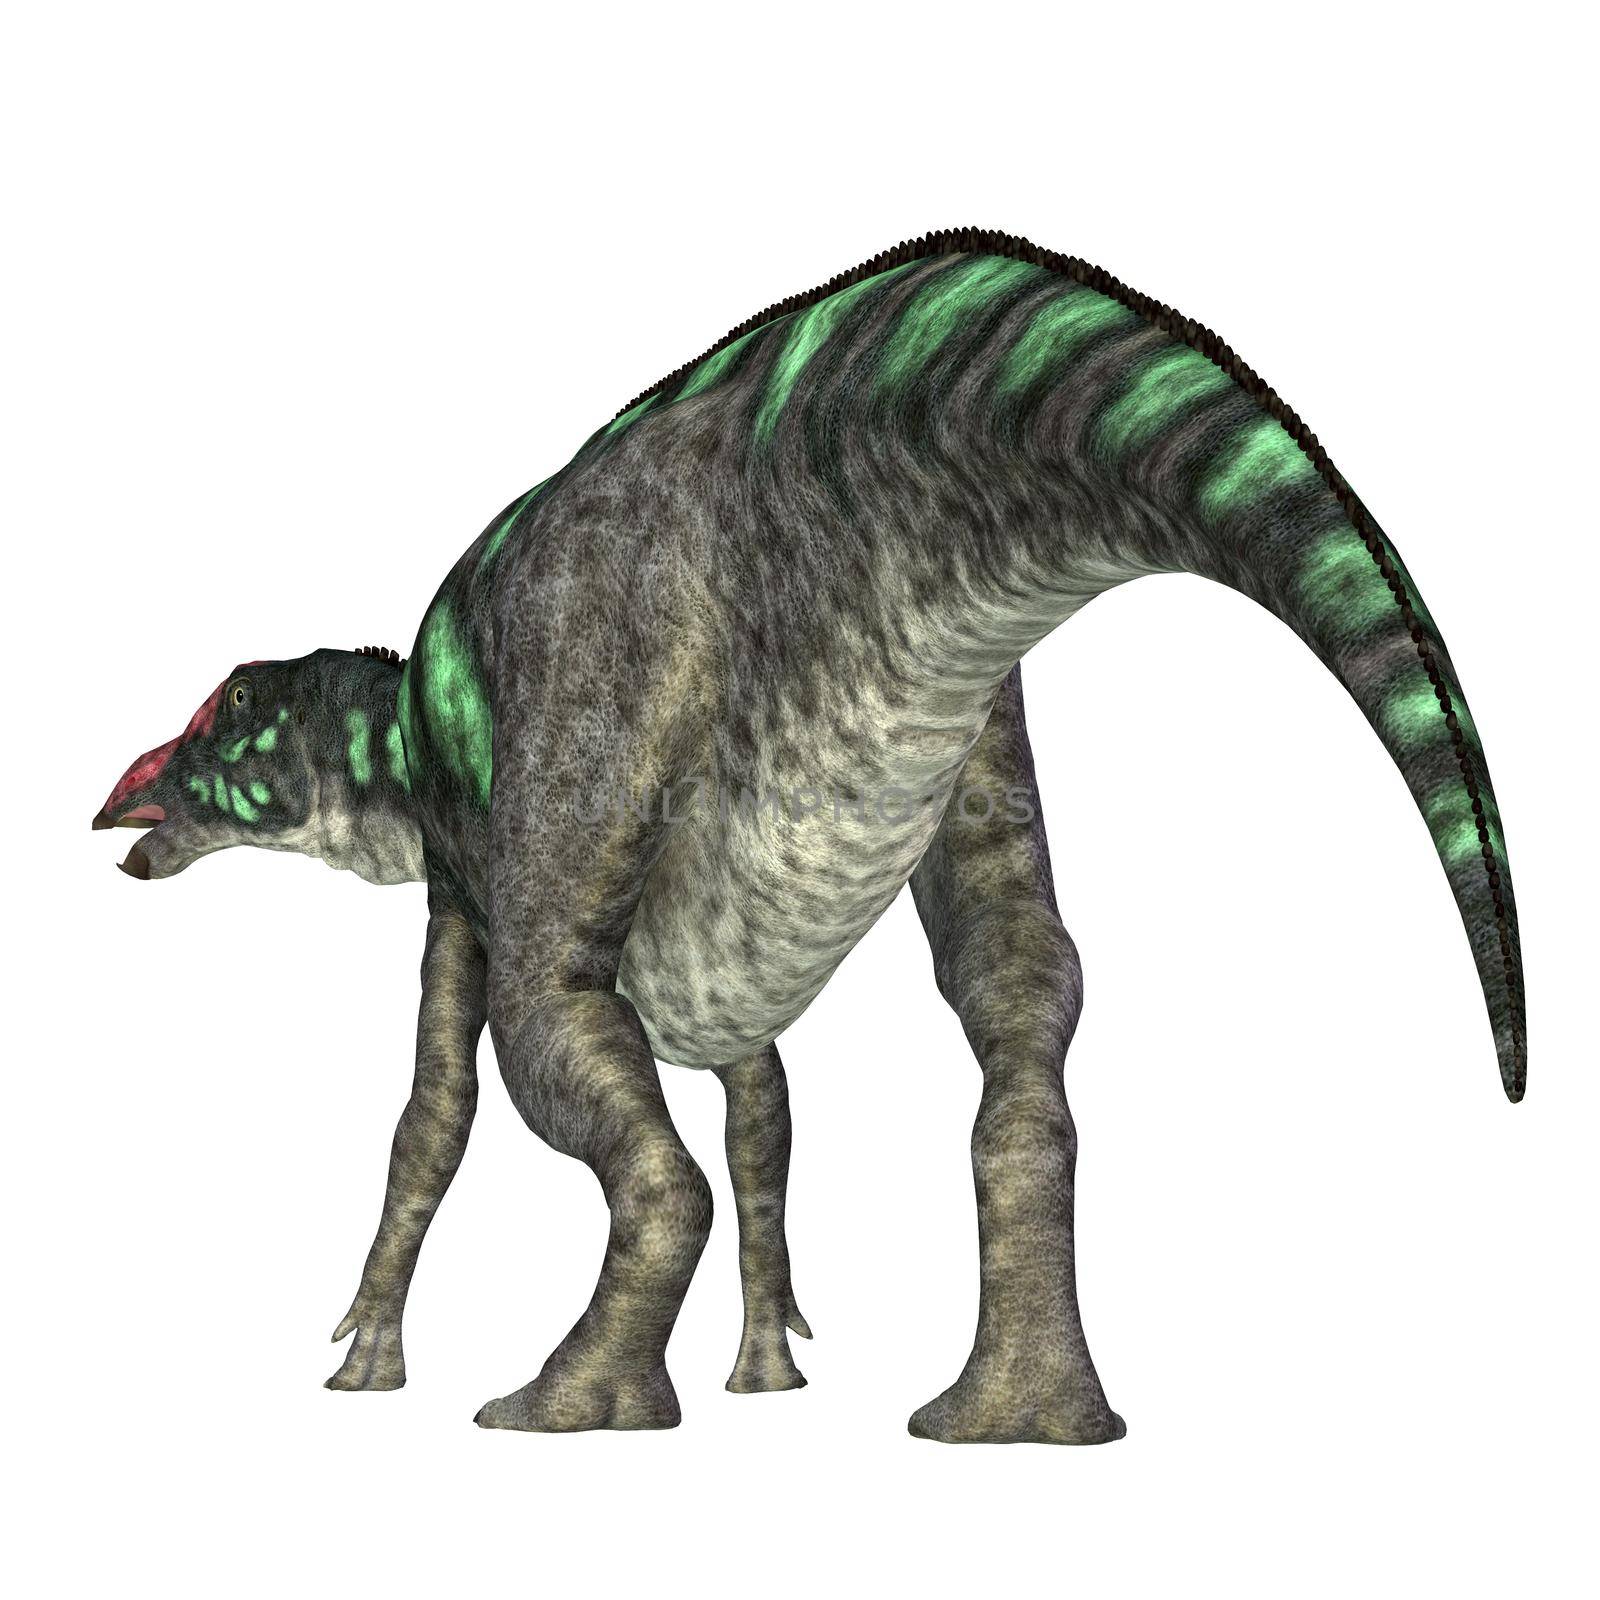 Maiasaura was a herbivorous duck-billed Hadrosaur dinosaur that lived in Montana during the Cretaceous Period.